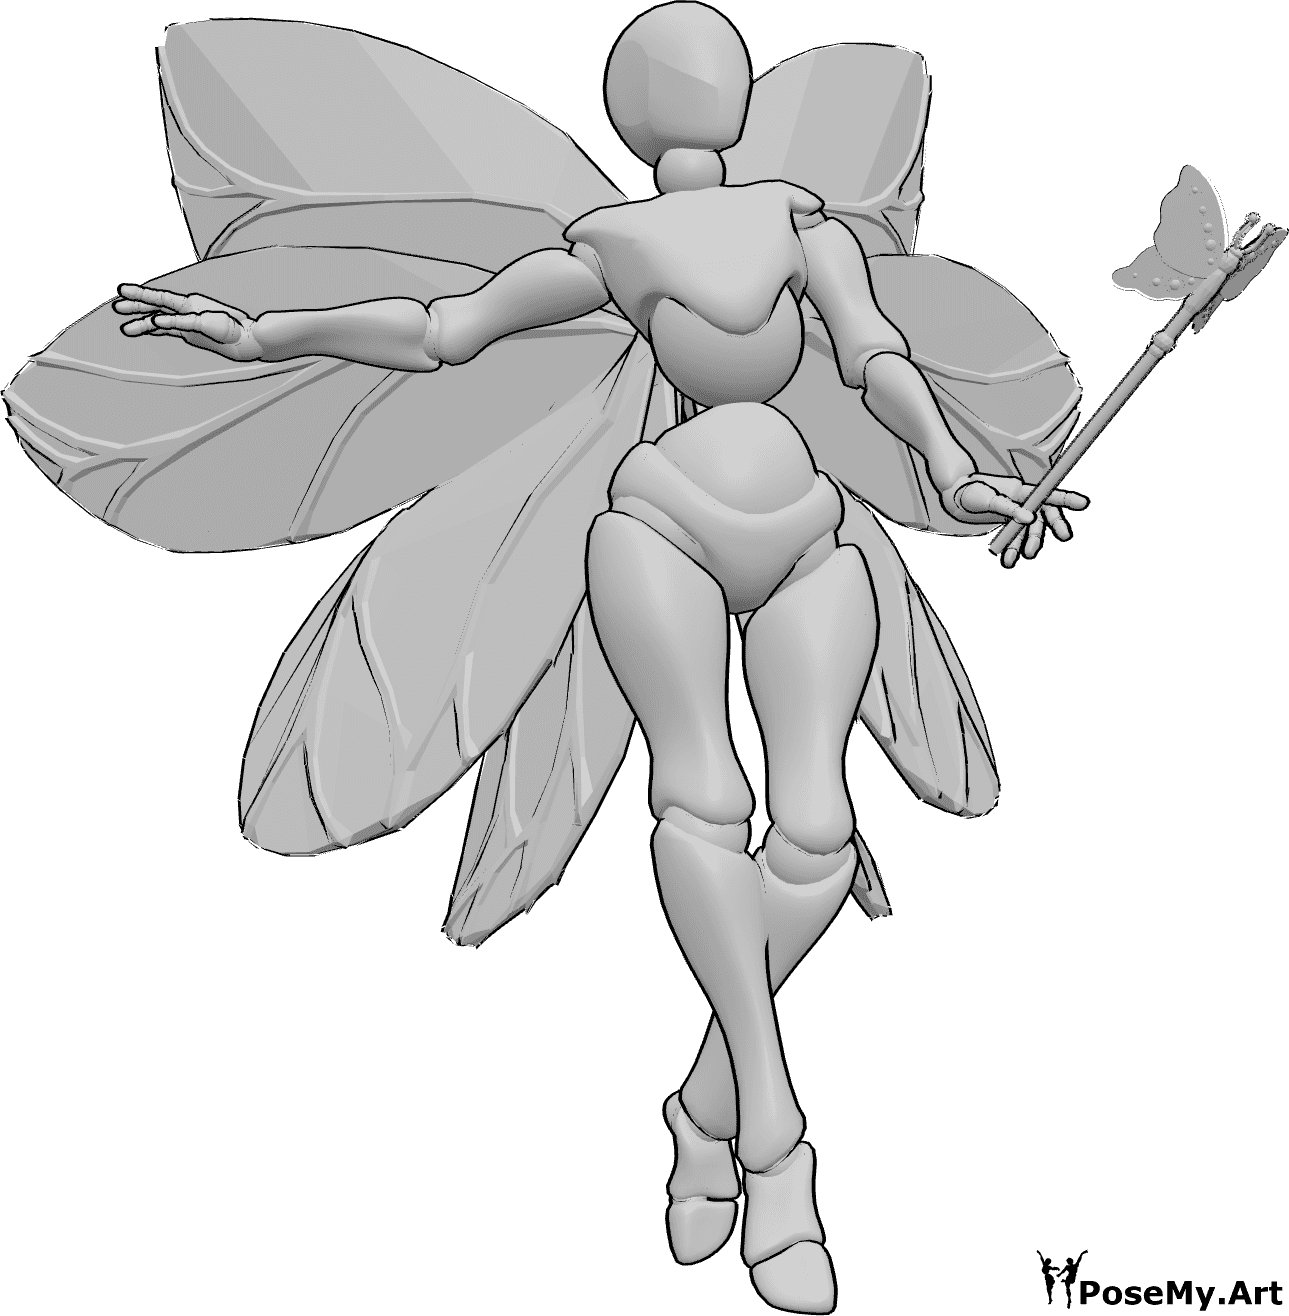 Pose Reference- Fairy dancing pose - Female fairy is flying, holding a fairy wand in her left hand and dancing